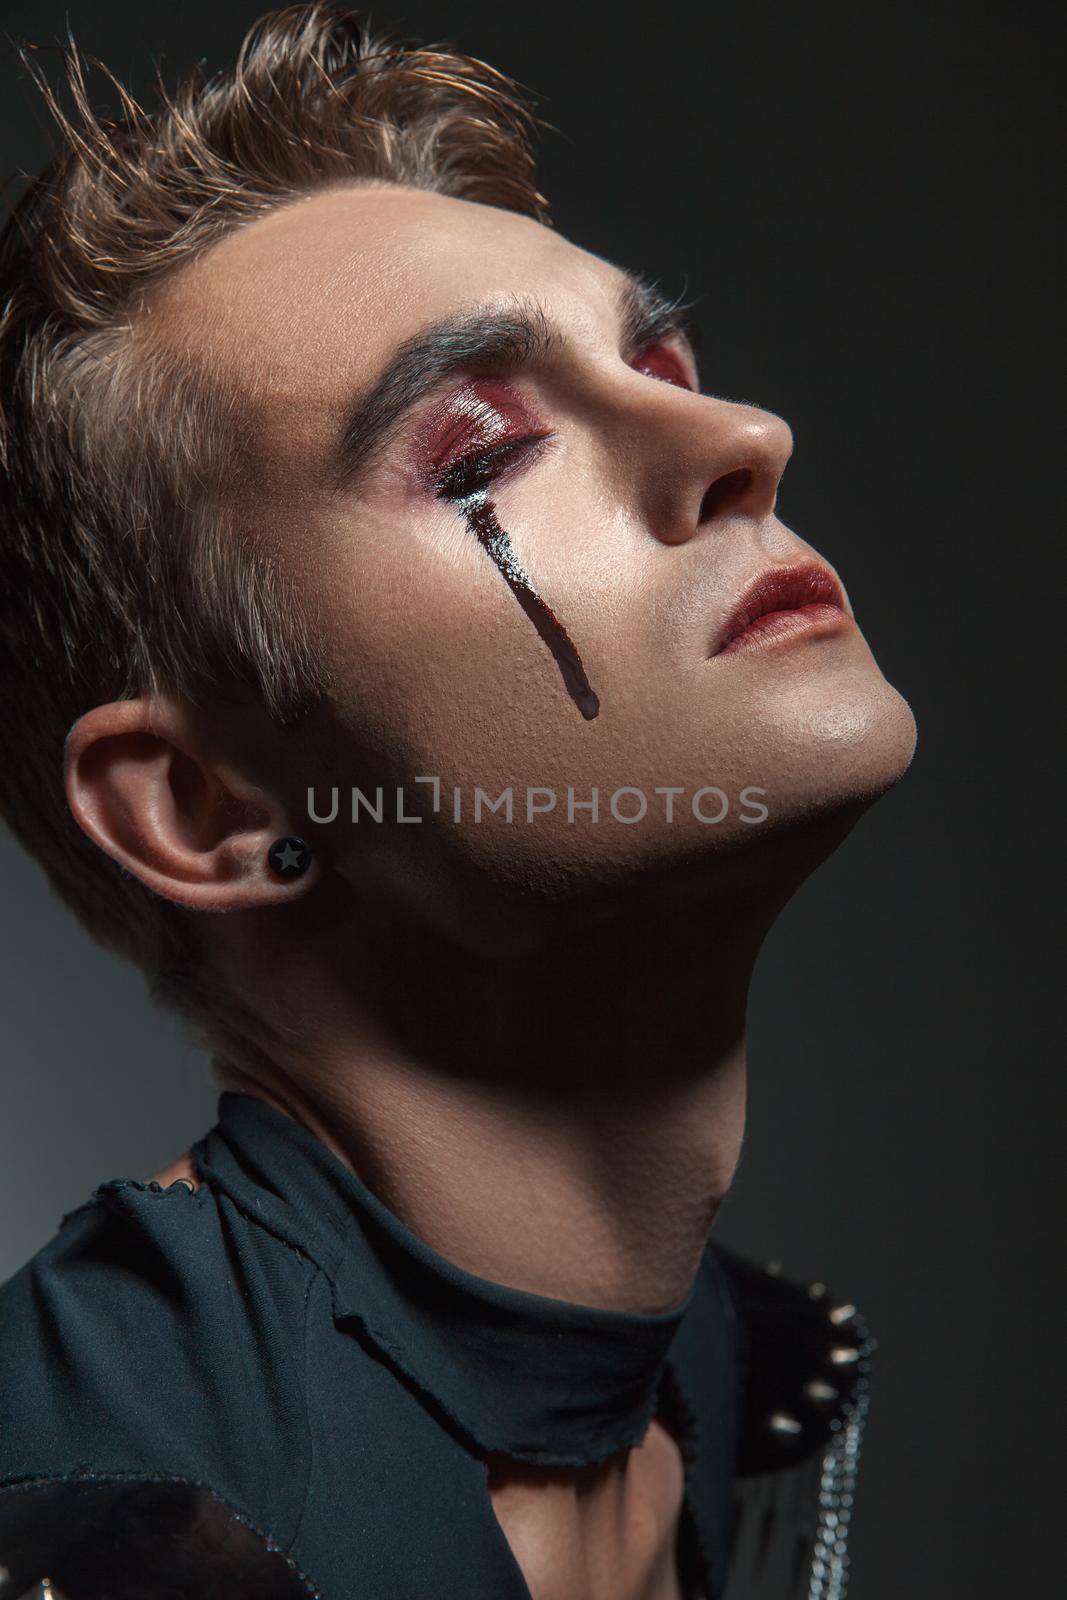 a young man with make up and painted tears. his eyes closed. Isolated.